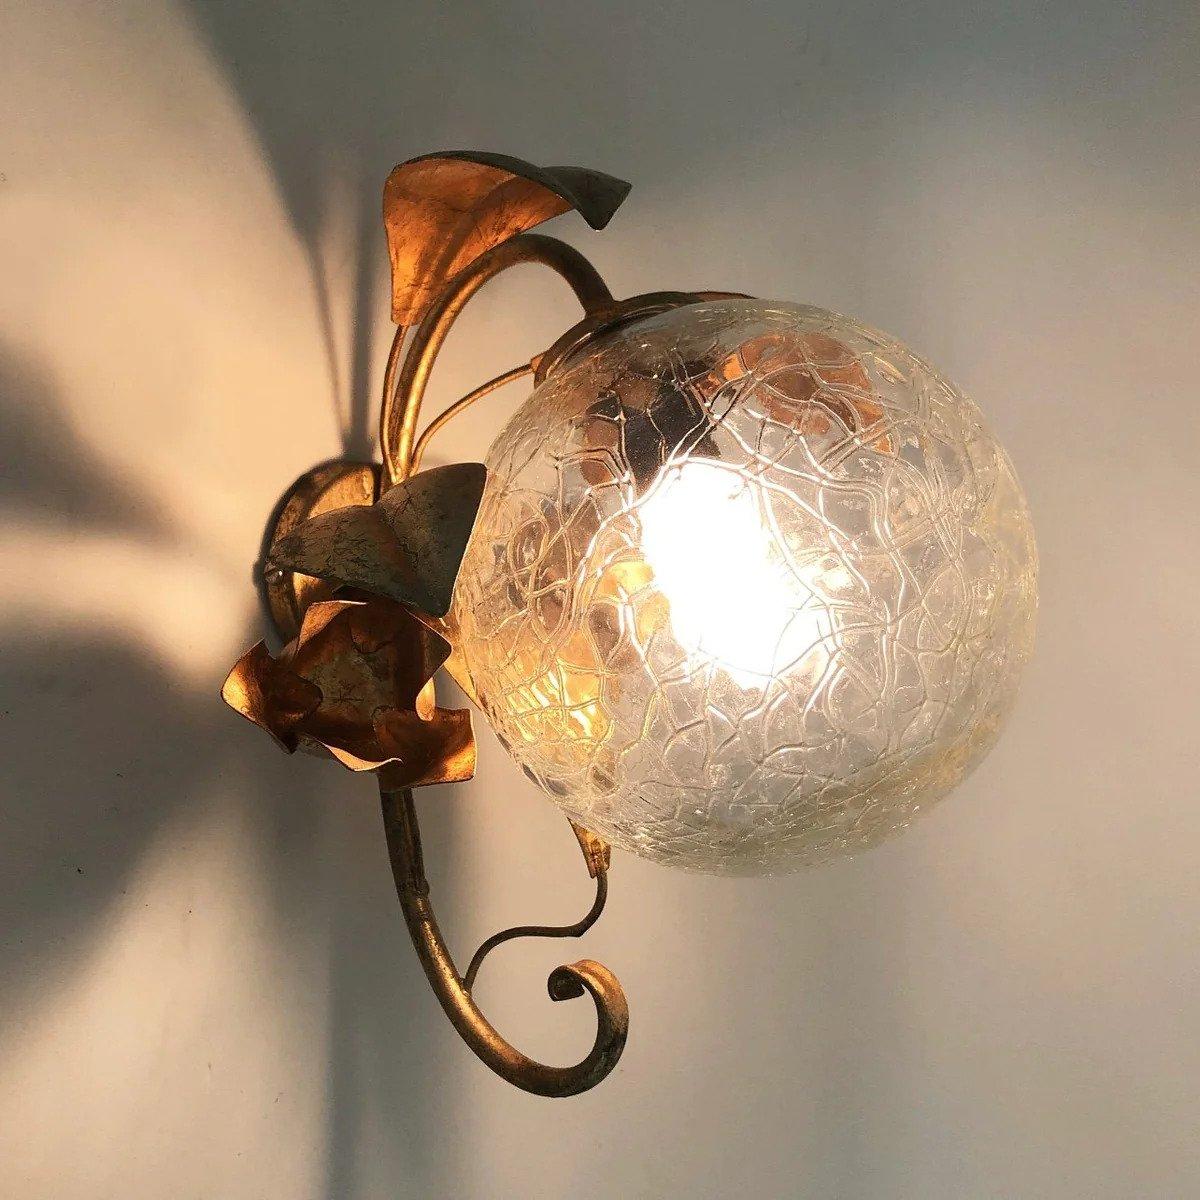 Beautiful pair of sconces featuring whimsical gilt metal structure with floral motif and unique crackle effect glass globes. Designed and produced in Italy in the 1950's. Has been function tested and gives off a beautiful glow when illuminated. Some